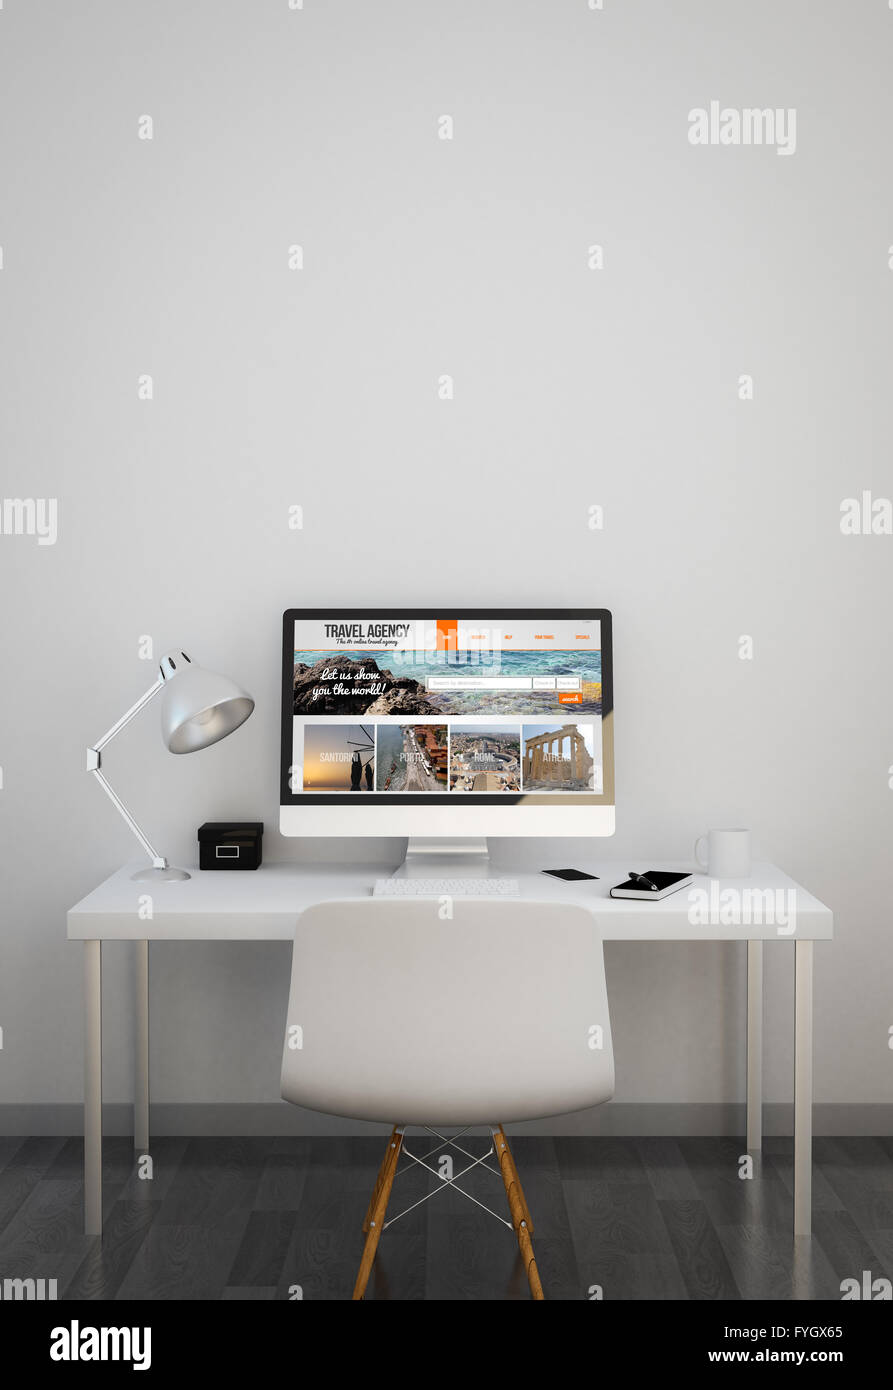 clean workspace with travel website on screen. 3d illustration. Stock Photo